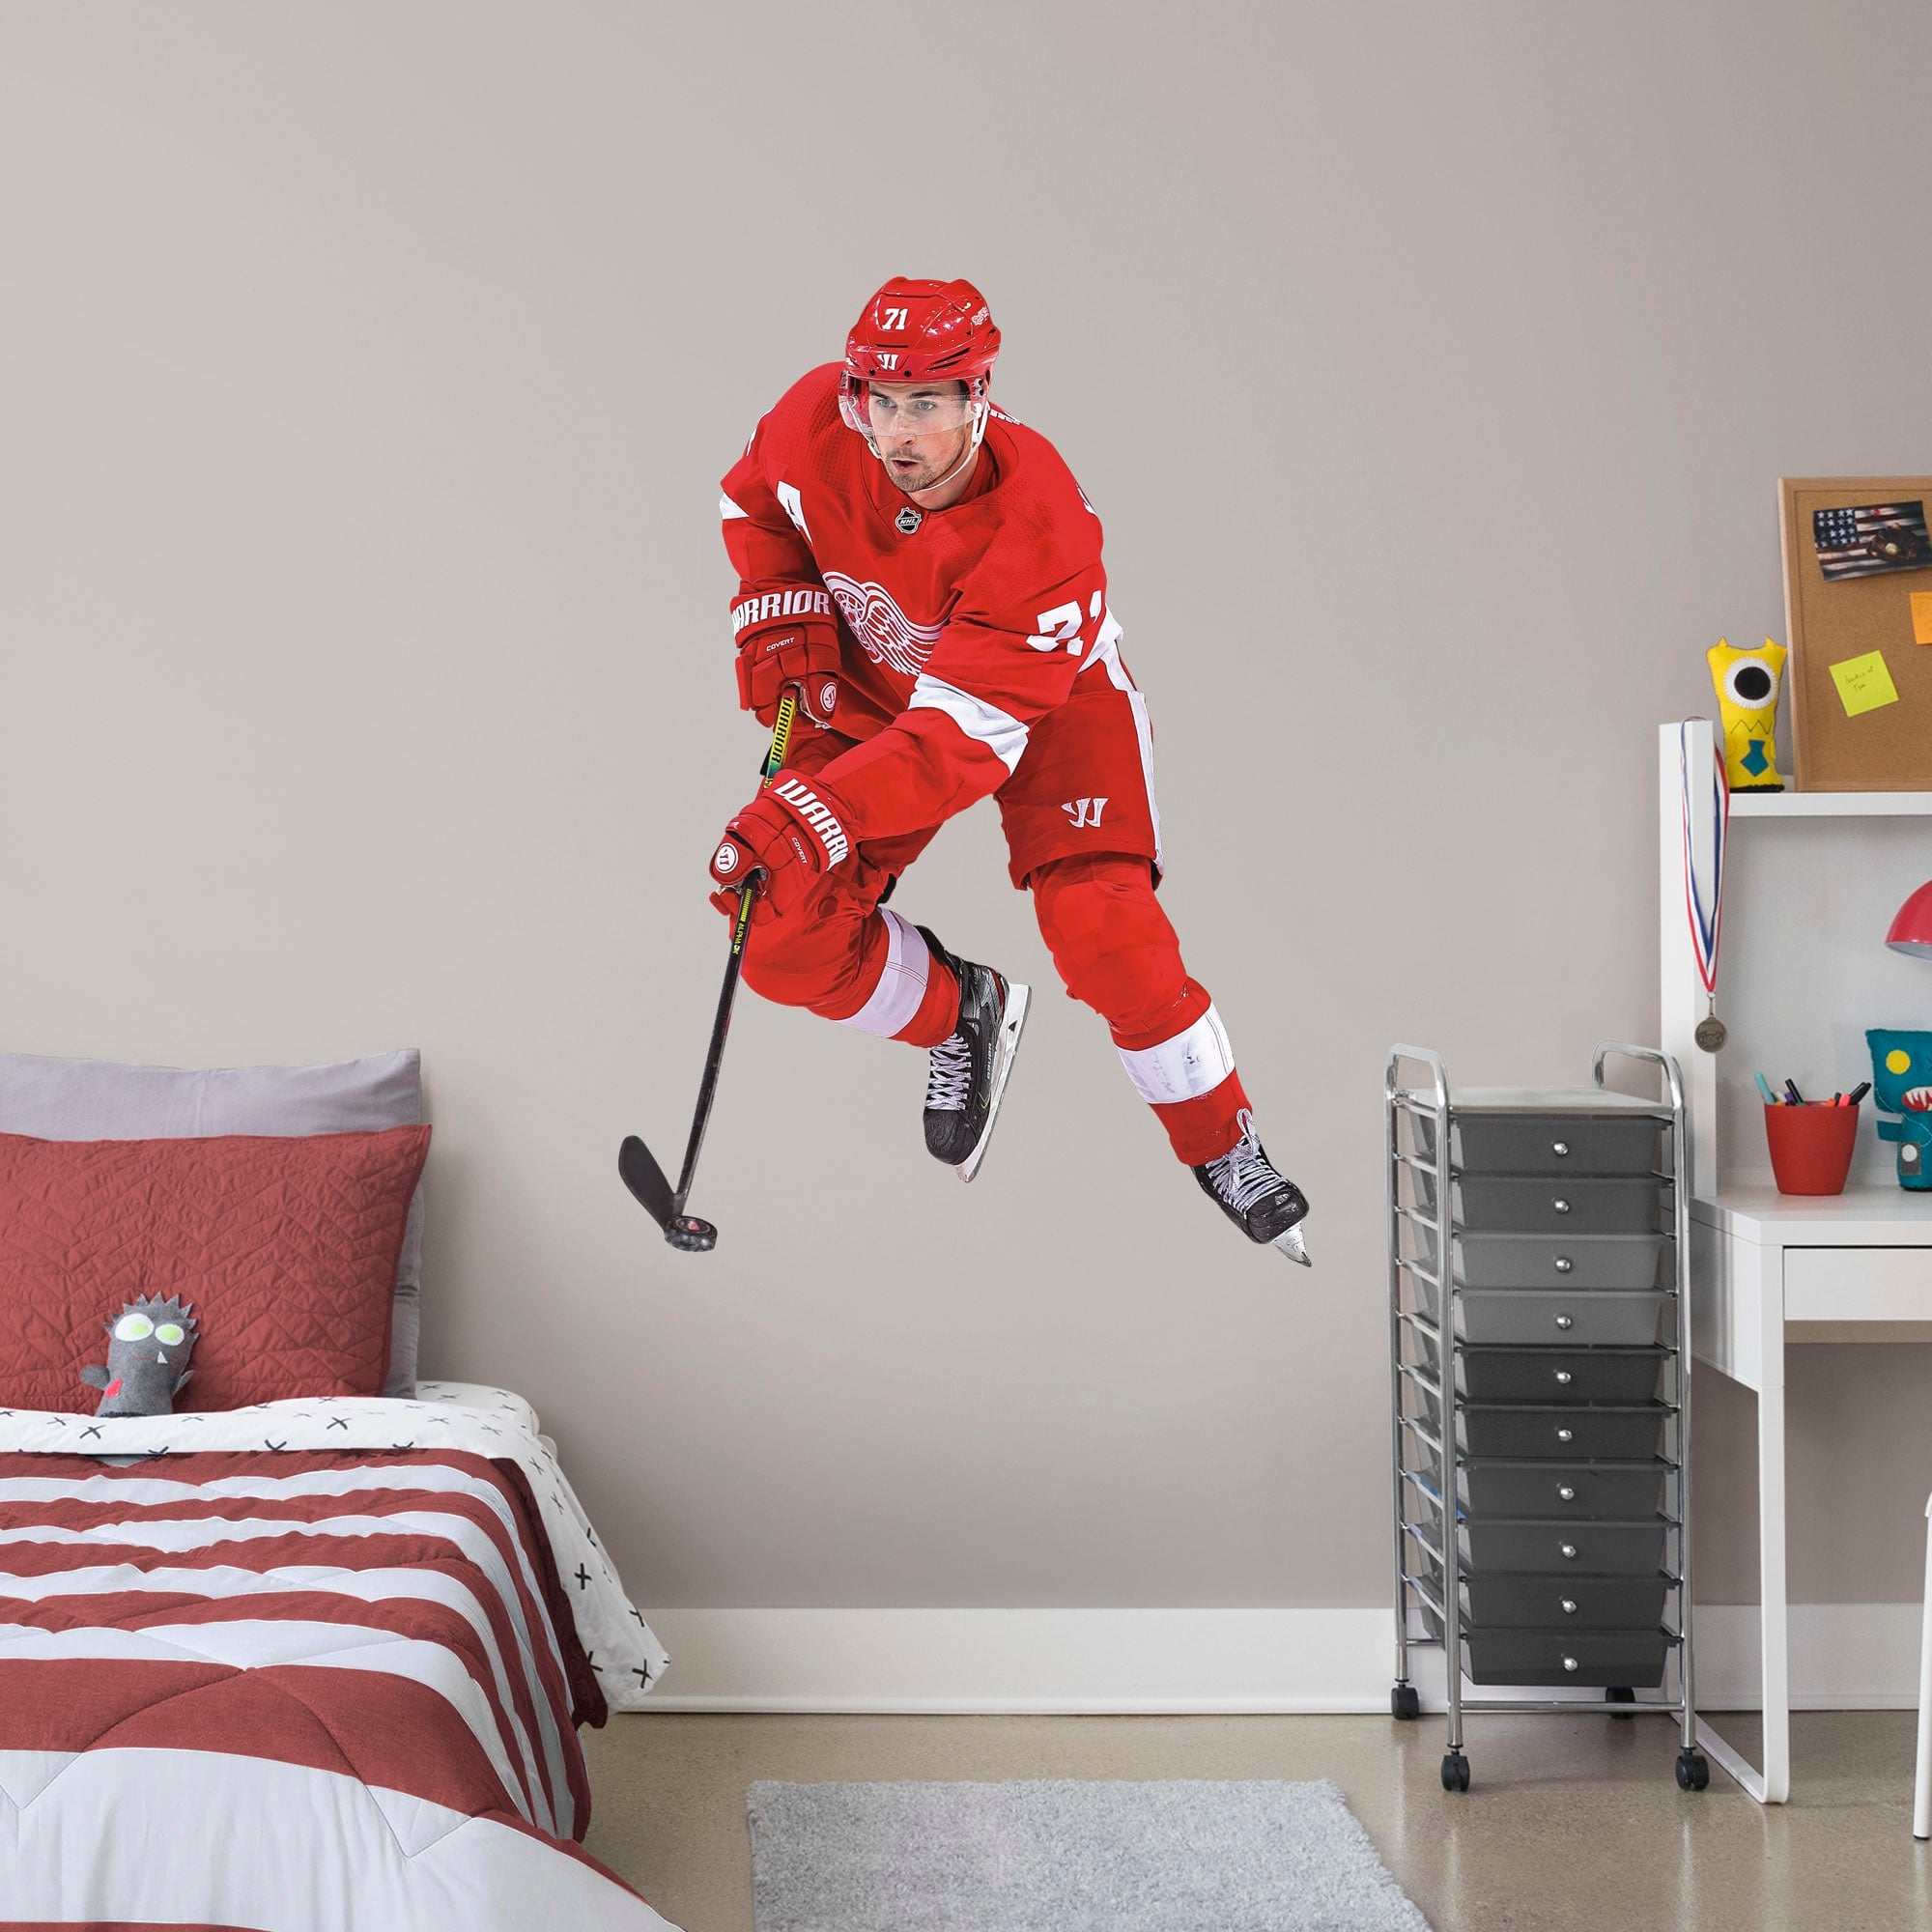 Dylan Larkin for Detroit Red Wings - Officially Licensed NHL Removable Wall Decal Giant Athlete + 2 Decals (35"W x 50"H) by Fath